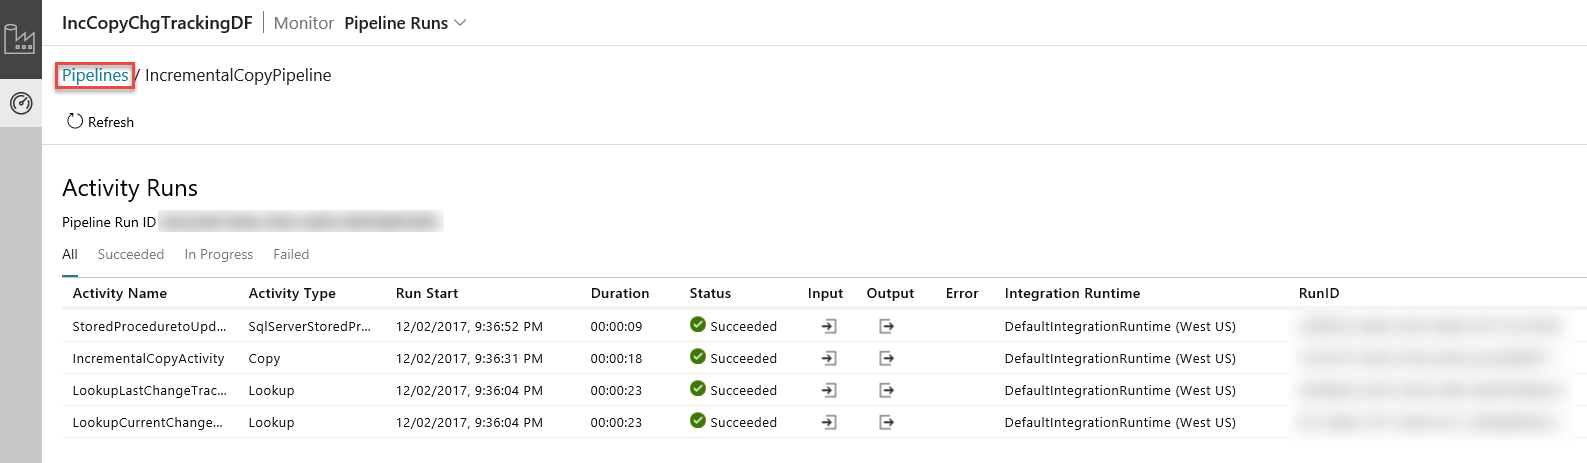 Screenshot shows pipeline runs for a data factory with several marked as succeeded.